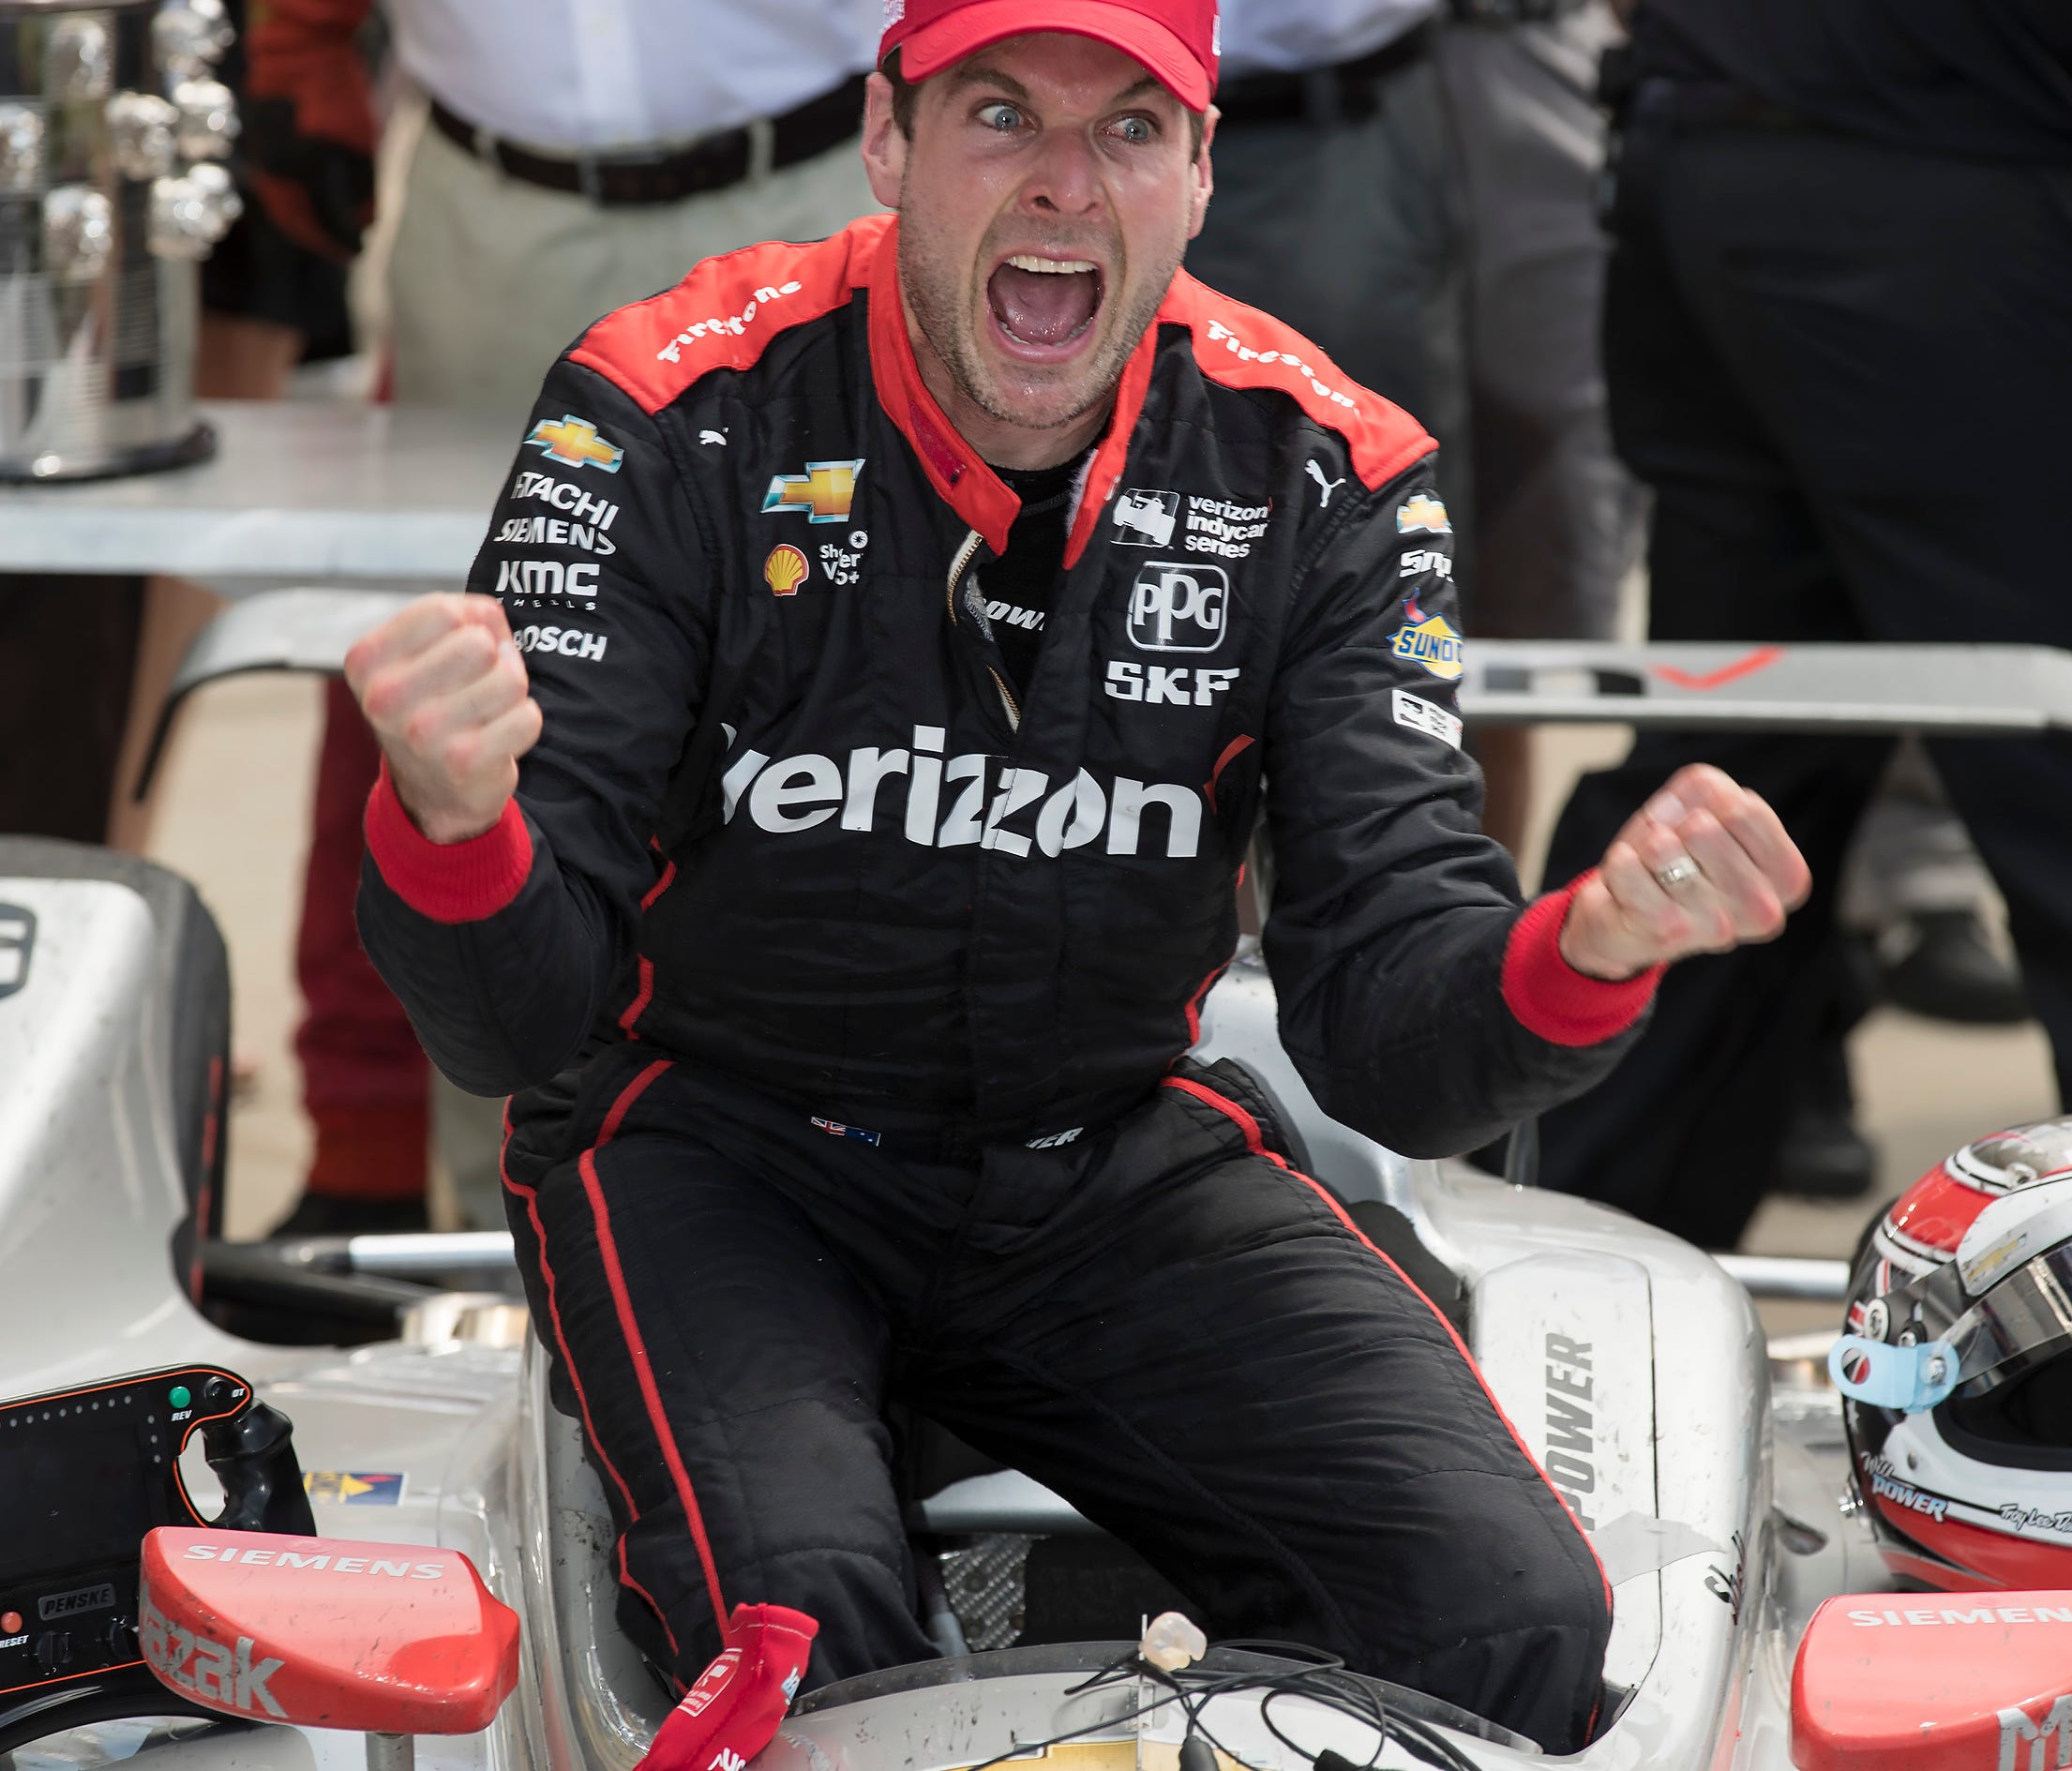 Team Penske IndyCar driver Will Power (12) celebrates winning the102nd running of the Indianapolis 500 at Indianapolis Motor Speedway on Sunday, May 27, 2018.